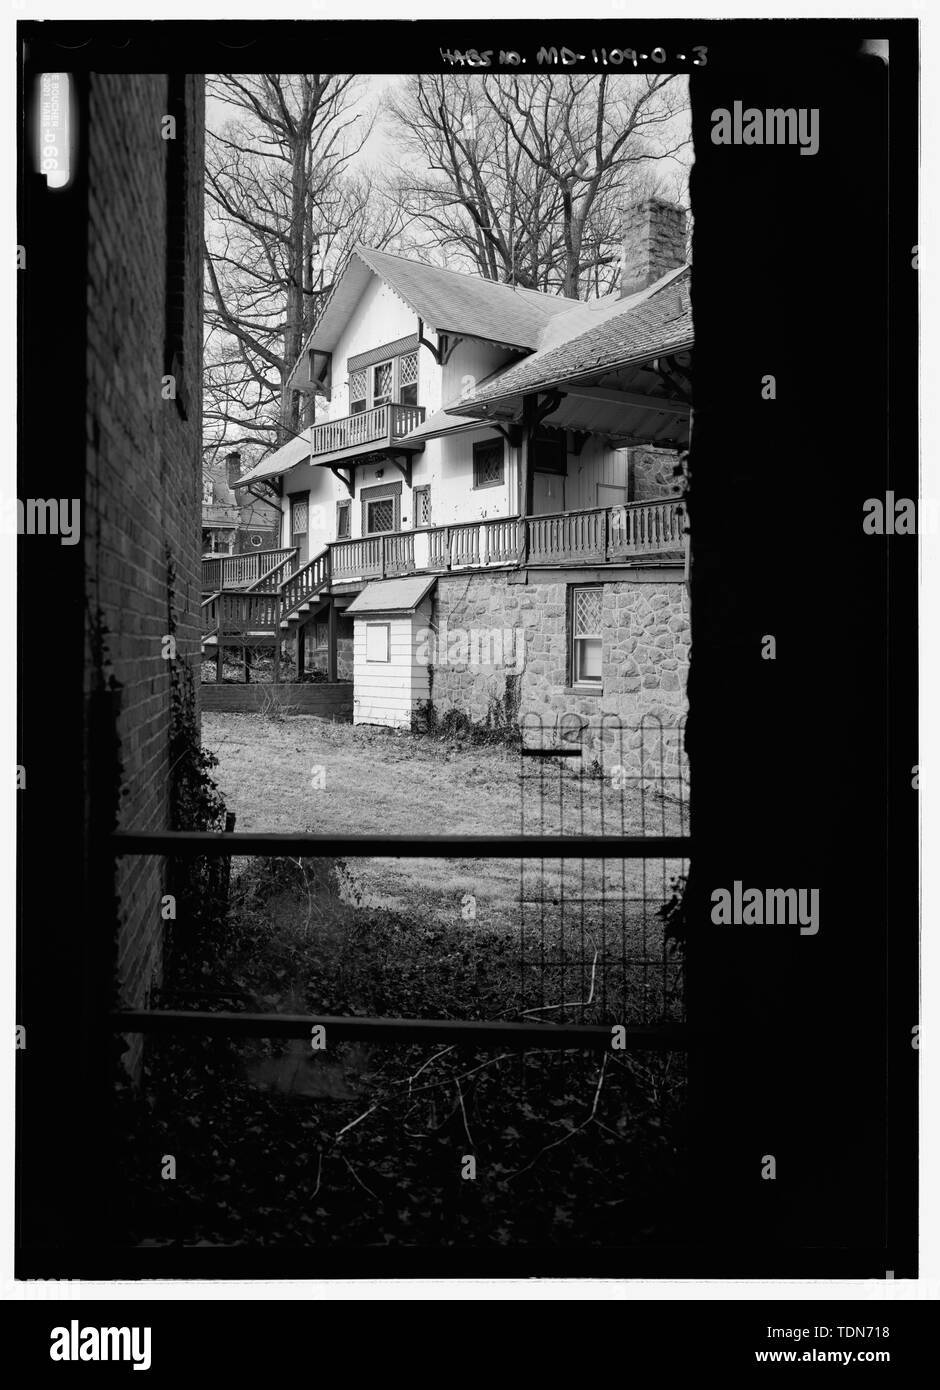 Perspective view, looking through tunnel to the west towards the Chalet - National Park Seminary, Swiss Chalet, 2802 Woodstock Avenue, Silver Spring, Montgomery County, MD; Beta Eta Theta sorority; Ament, James E; Price, Virginia B, transmitter; Ott, Cynthia, historian; Boucher, Jack E, photographer; Lavoie, Catherine C, project manager; Price, Virginia B, transmitter; Price, Virginia B, transmitter; Lavoie, Catherine C, project manager Stock Photo